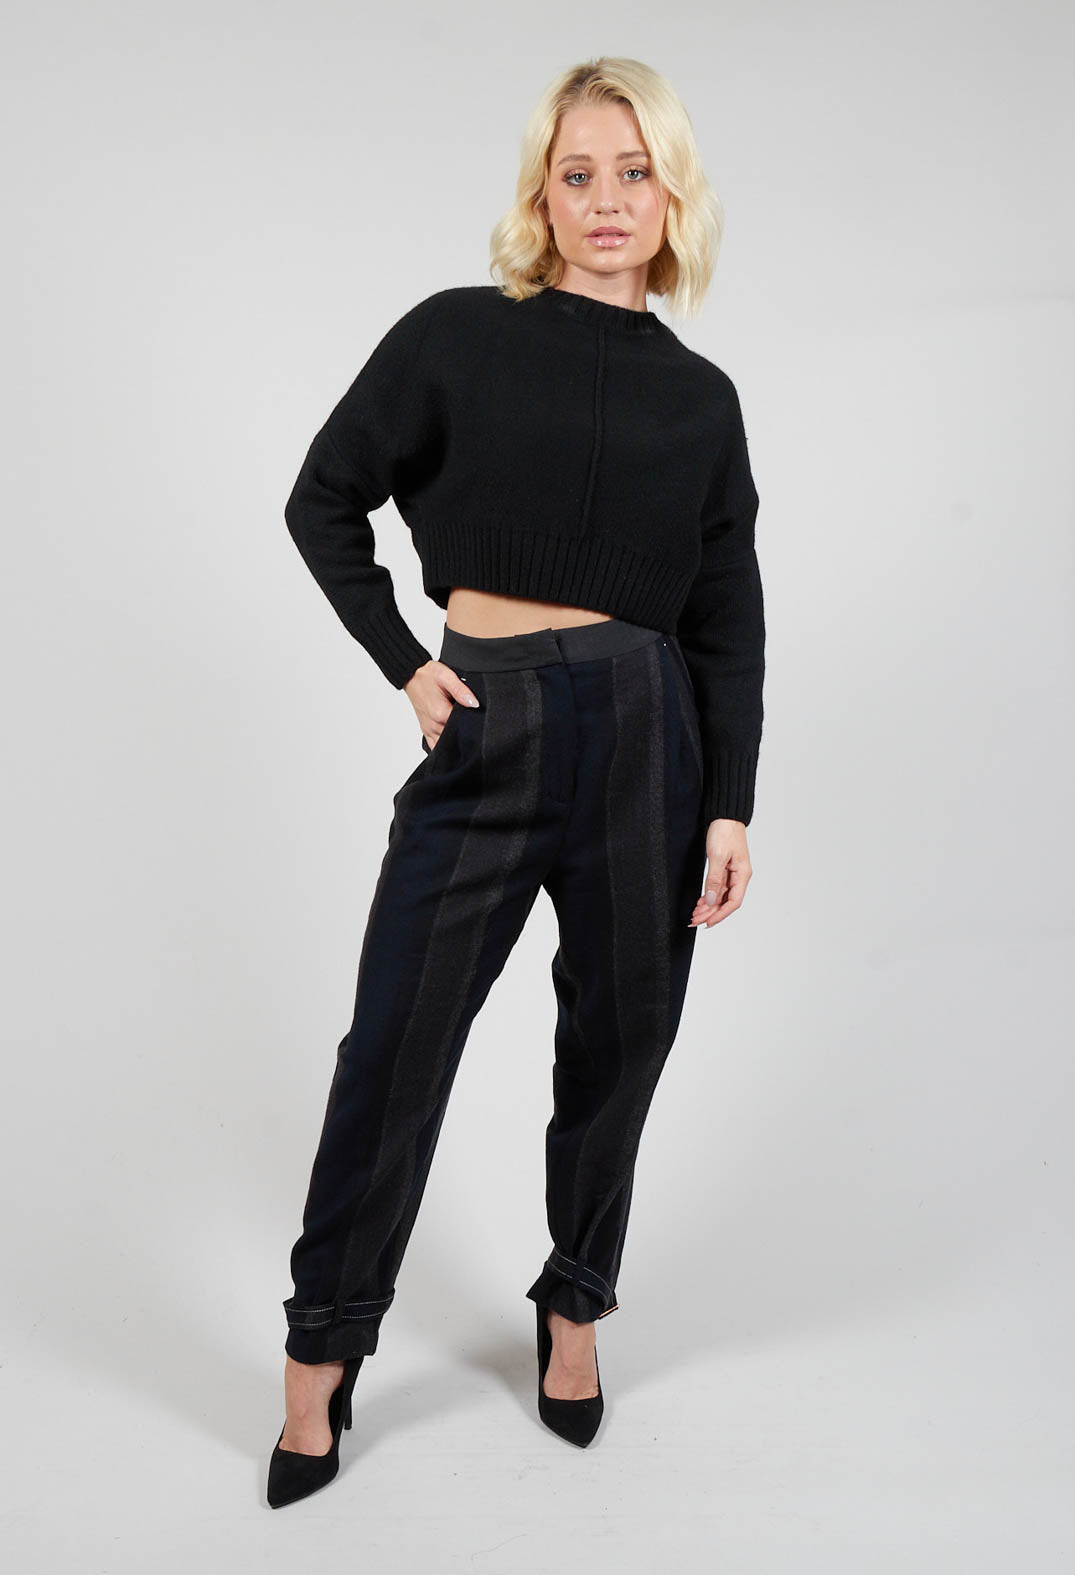 Trousers In Striped Black with Cuffs